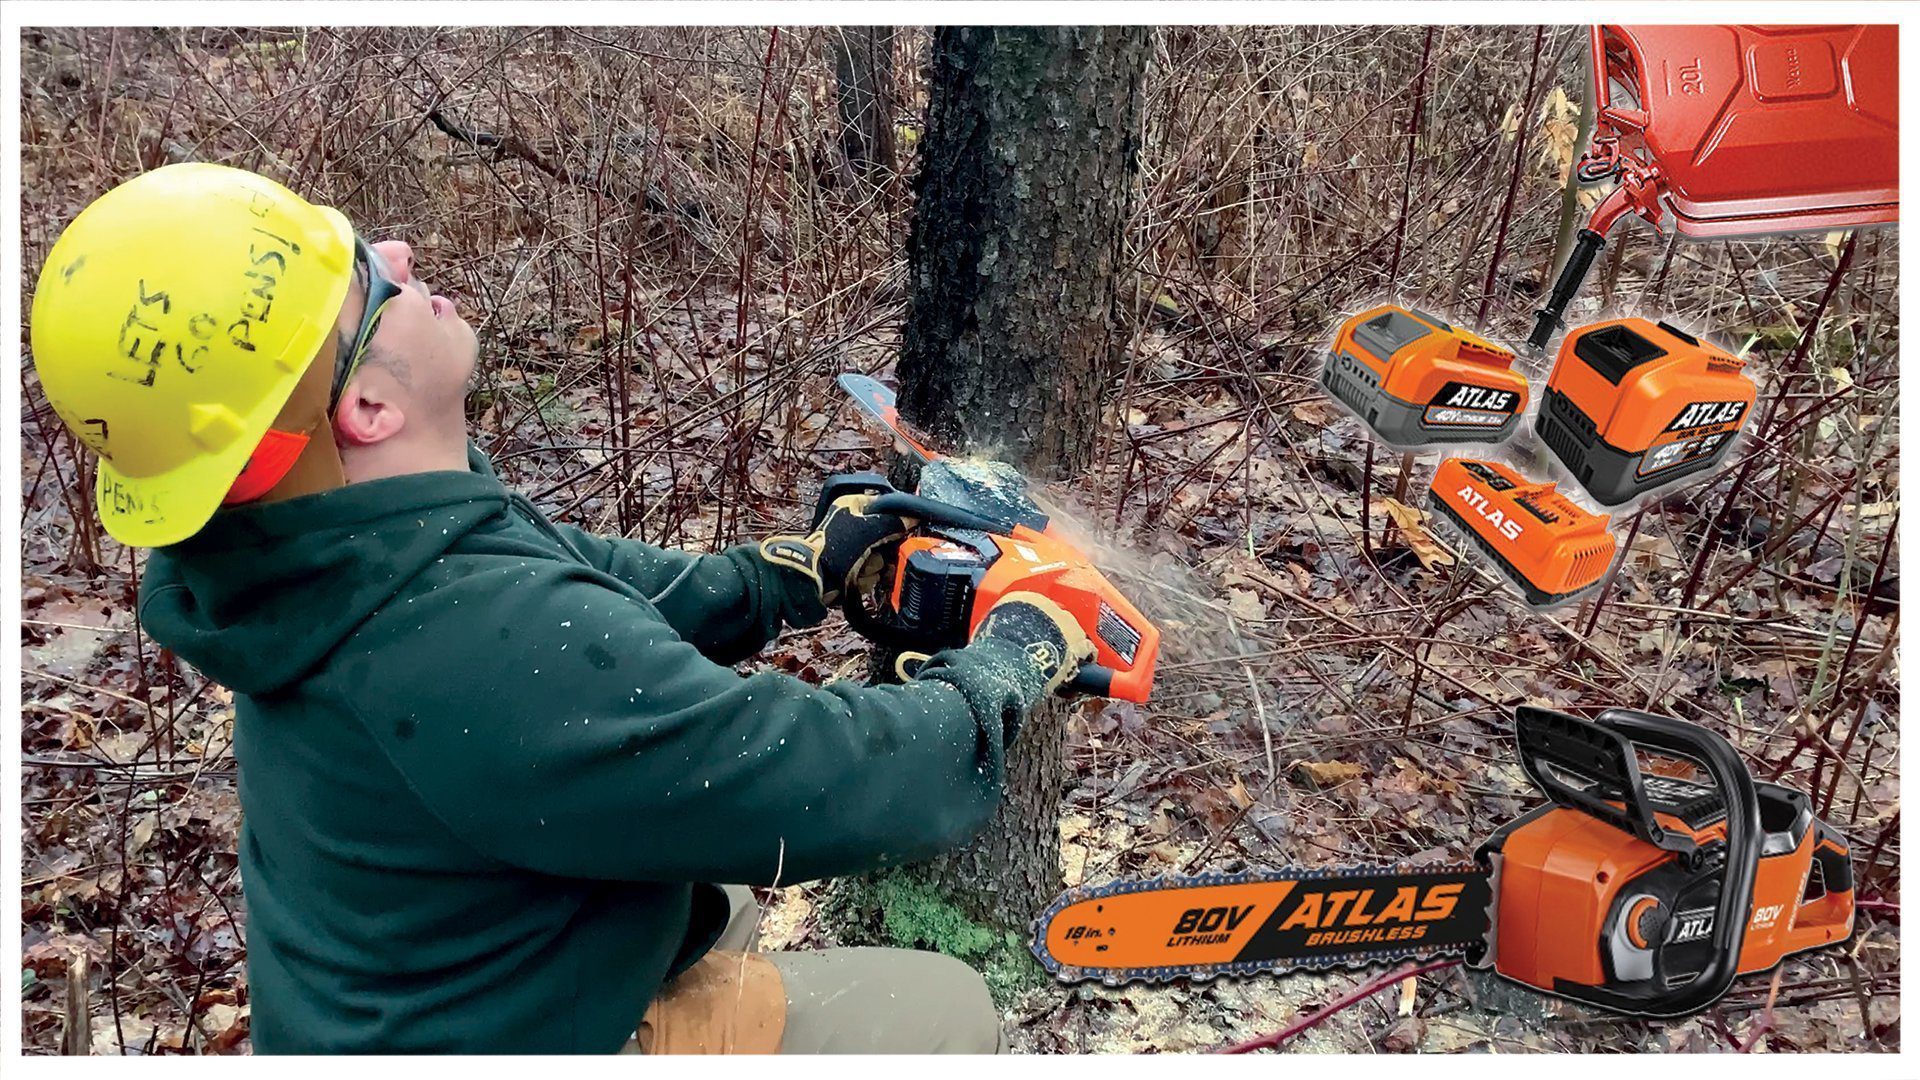 Atlas 80v Harbor Freight Chainsaw vs Gas Chainsaw